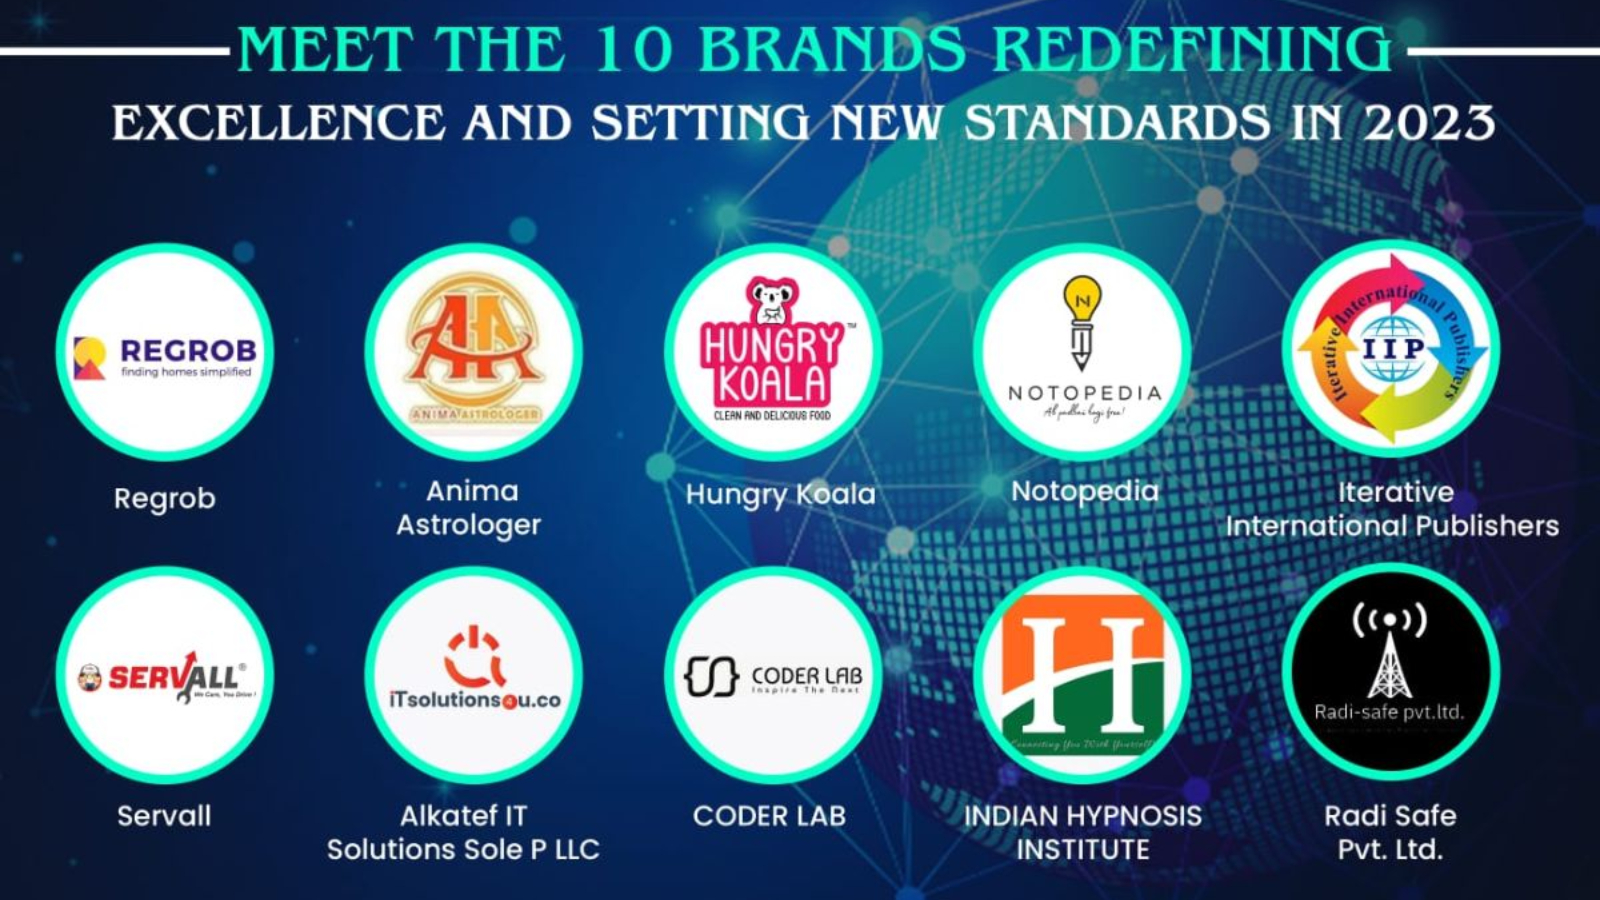 Meet the 10 Brands Redefining Excellence and Setting New Standards in 2023